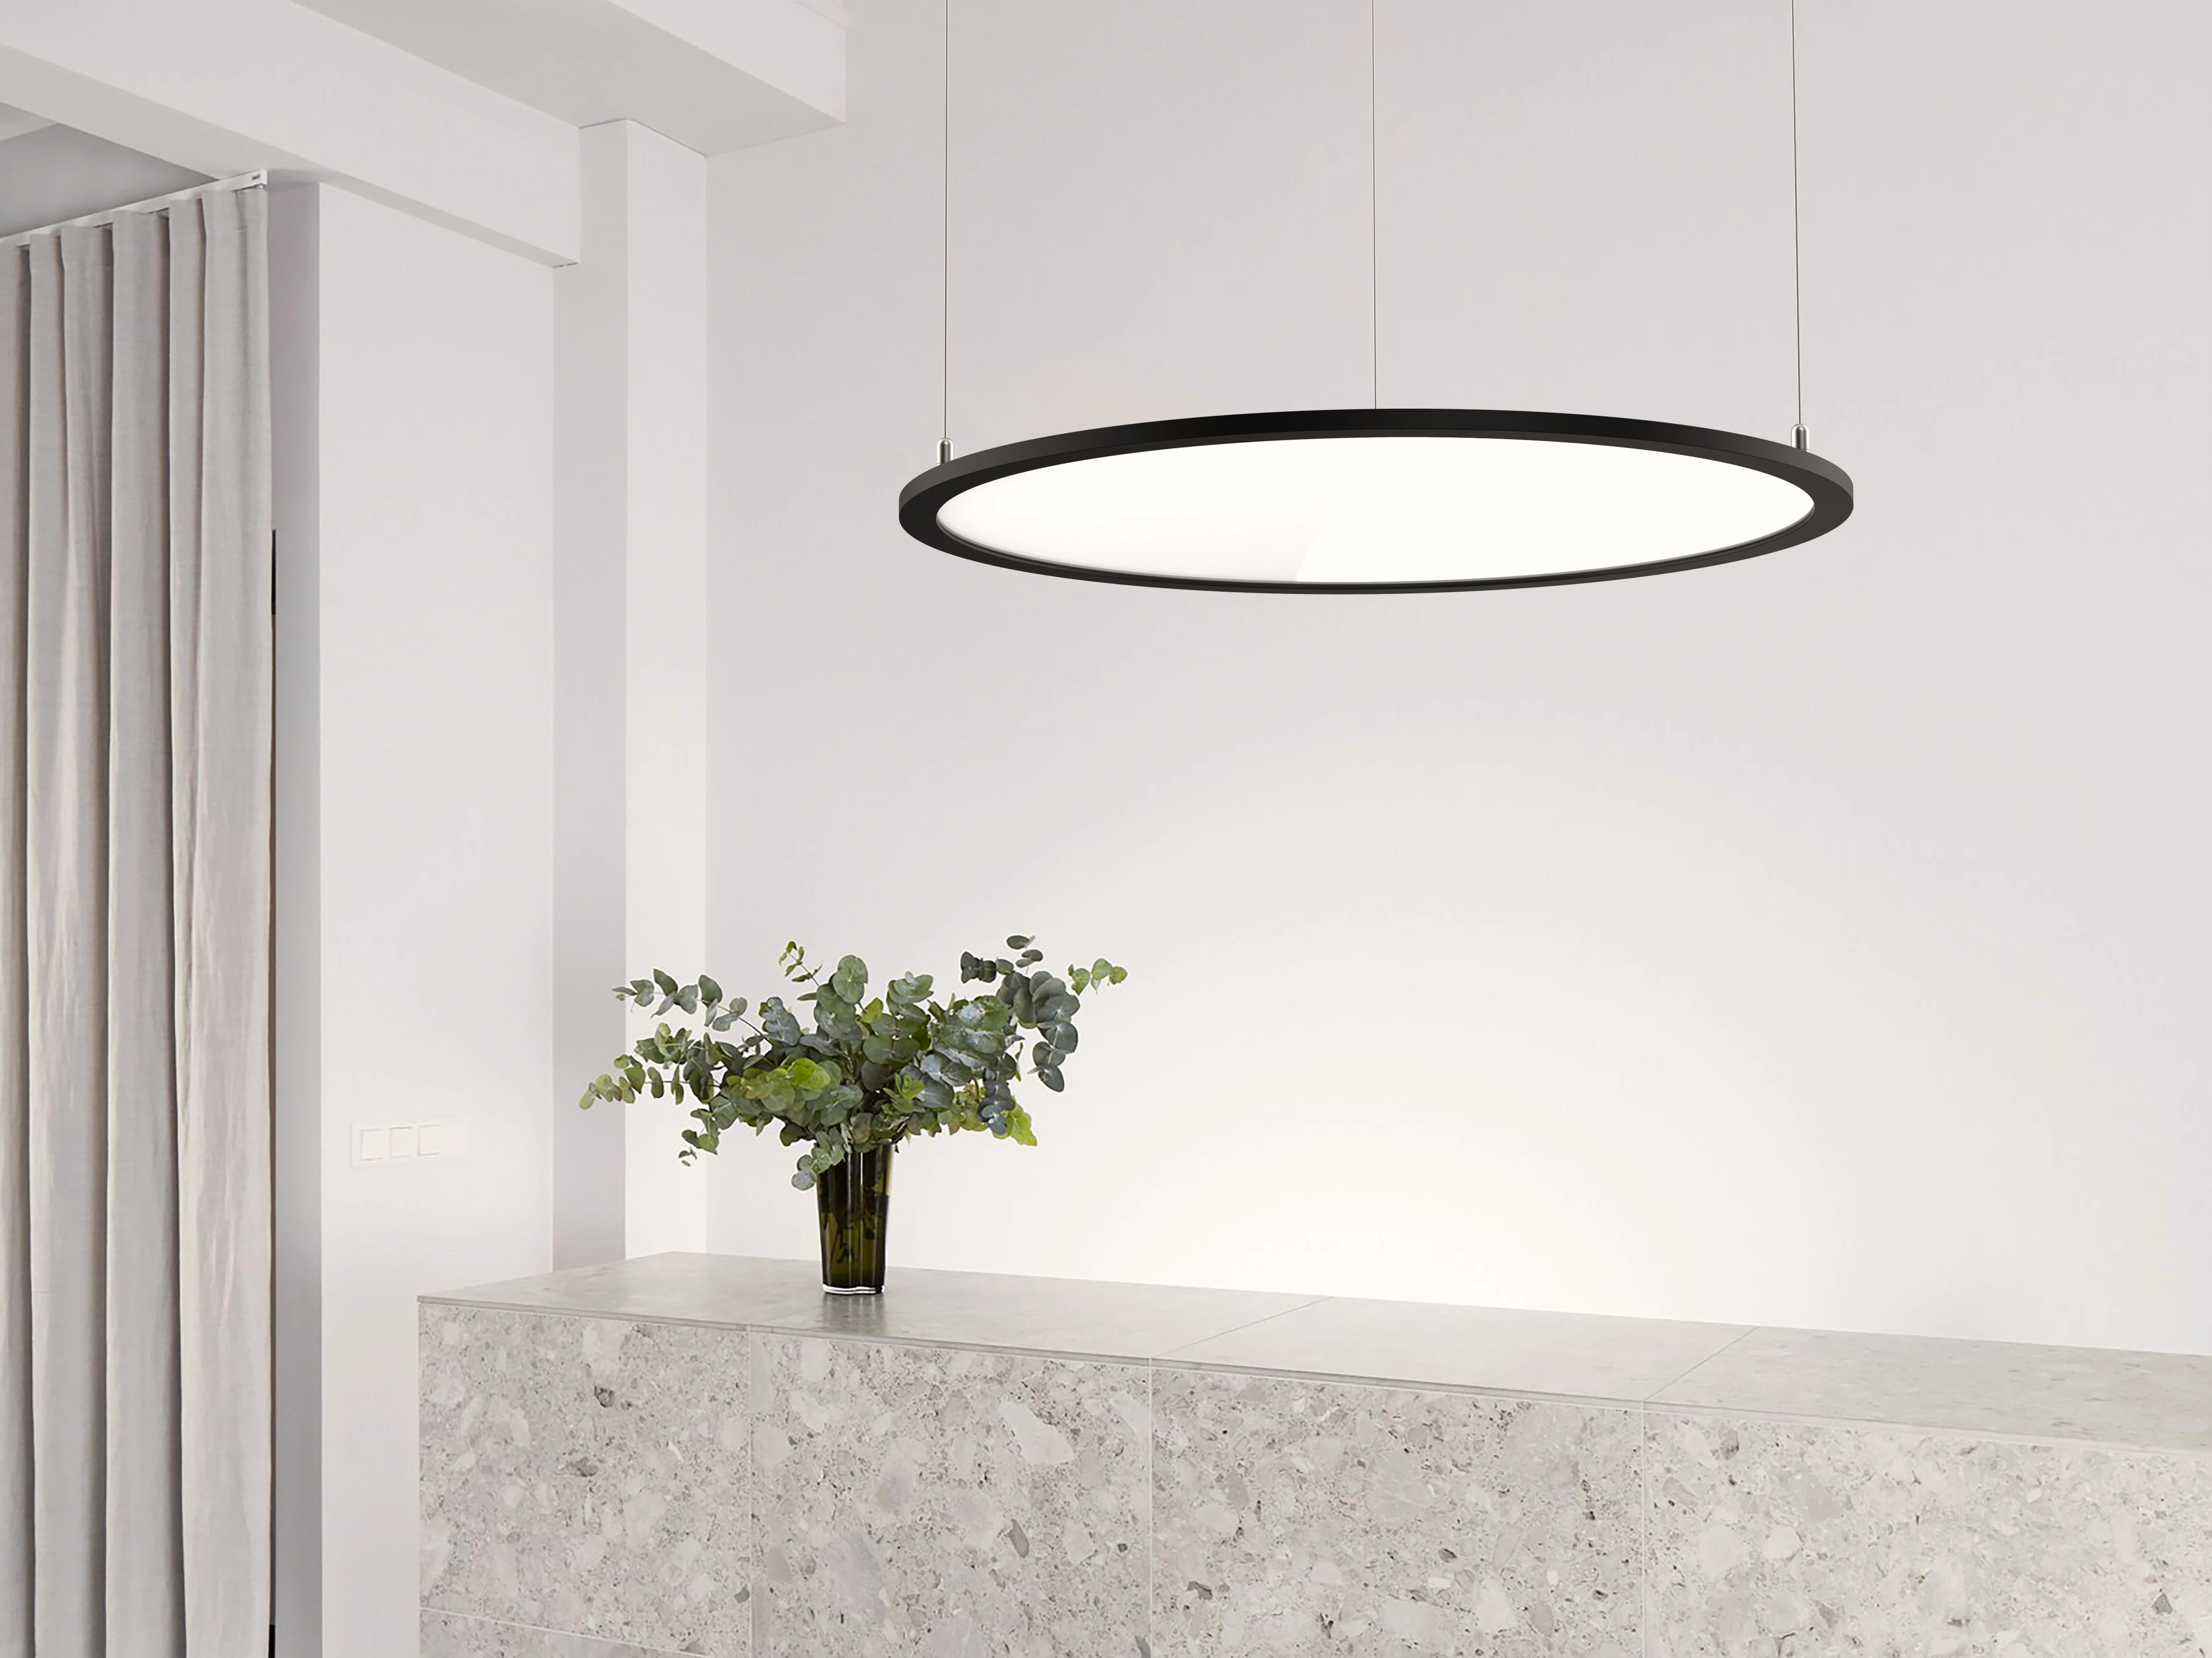 INLITY PNXT Clear Round LED Panel Light 900mm 5000K led panel light round for the Residential